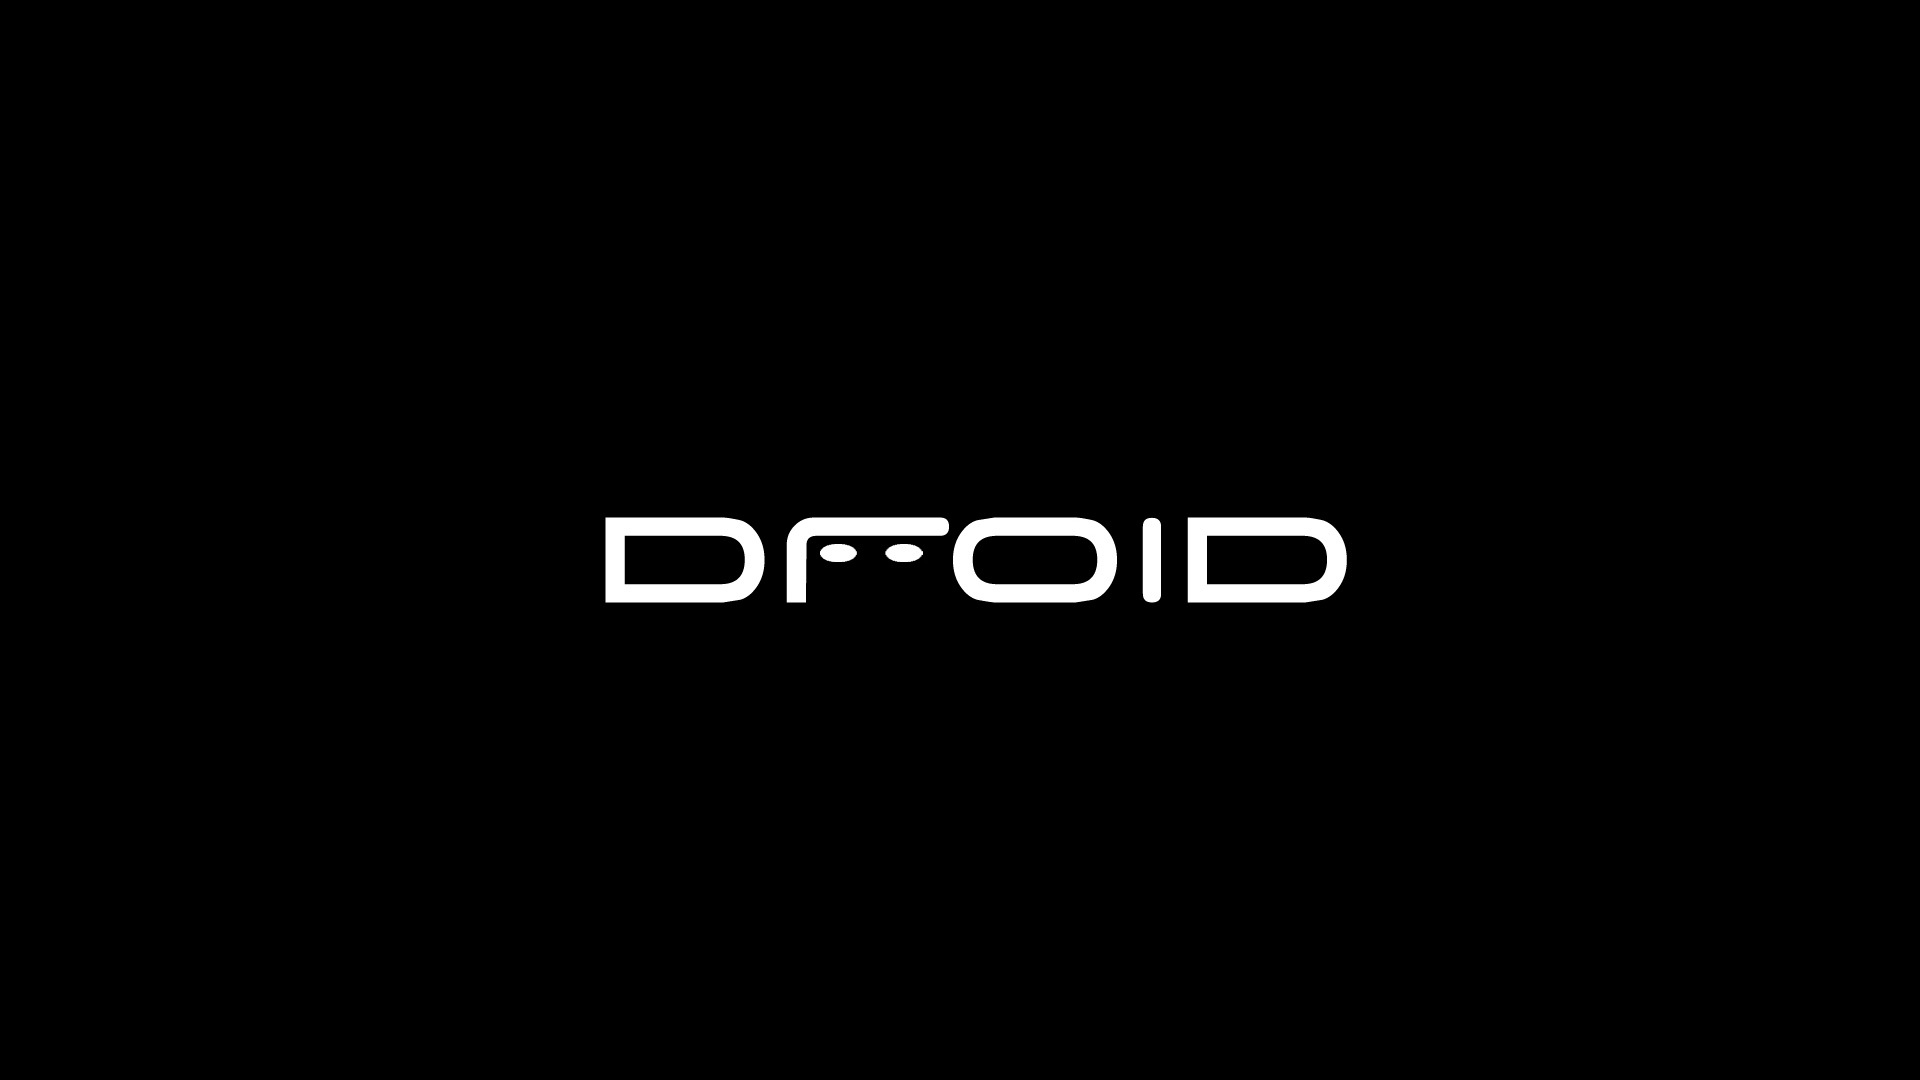 Droid Logo for 1920 x 1080 HDTV 1080p resolution